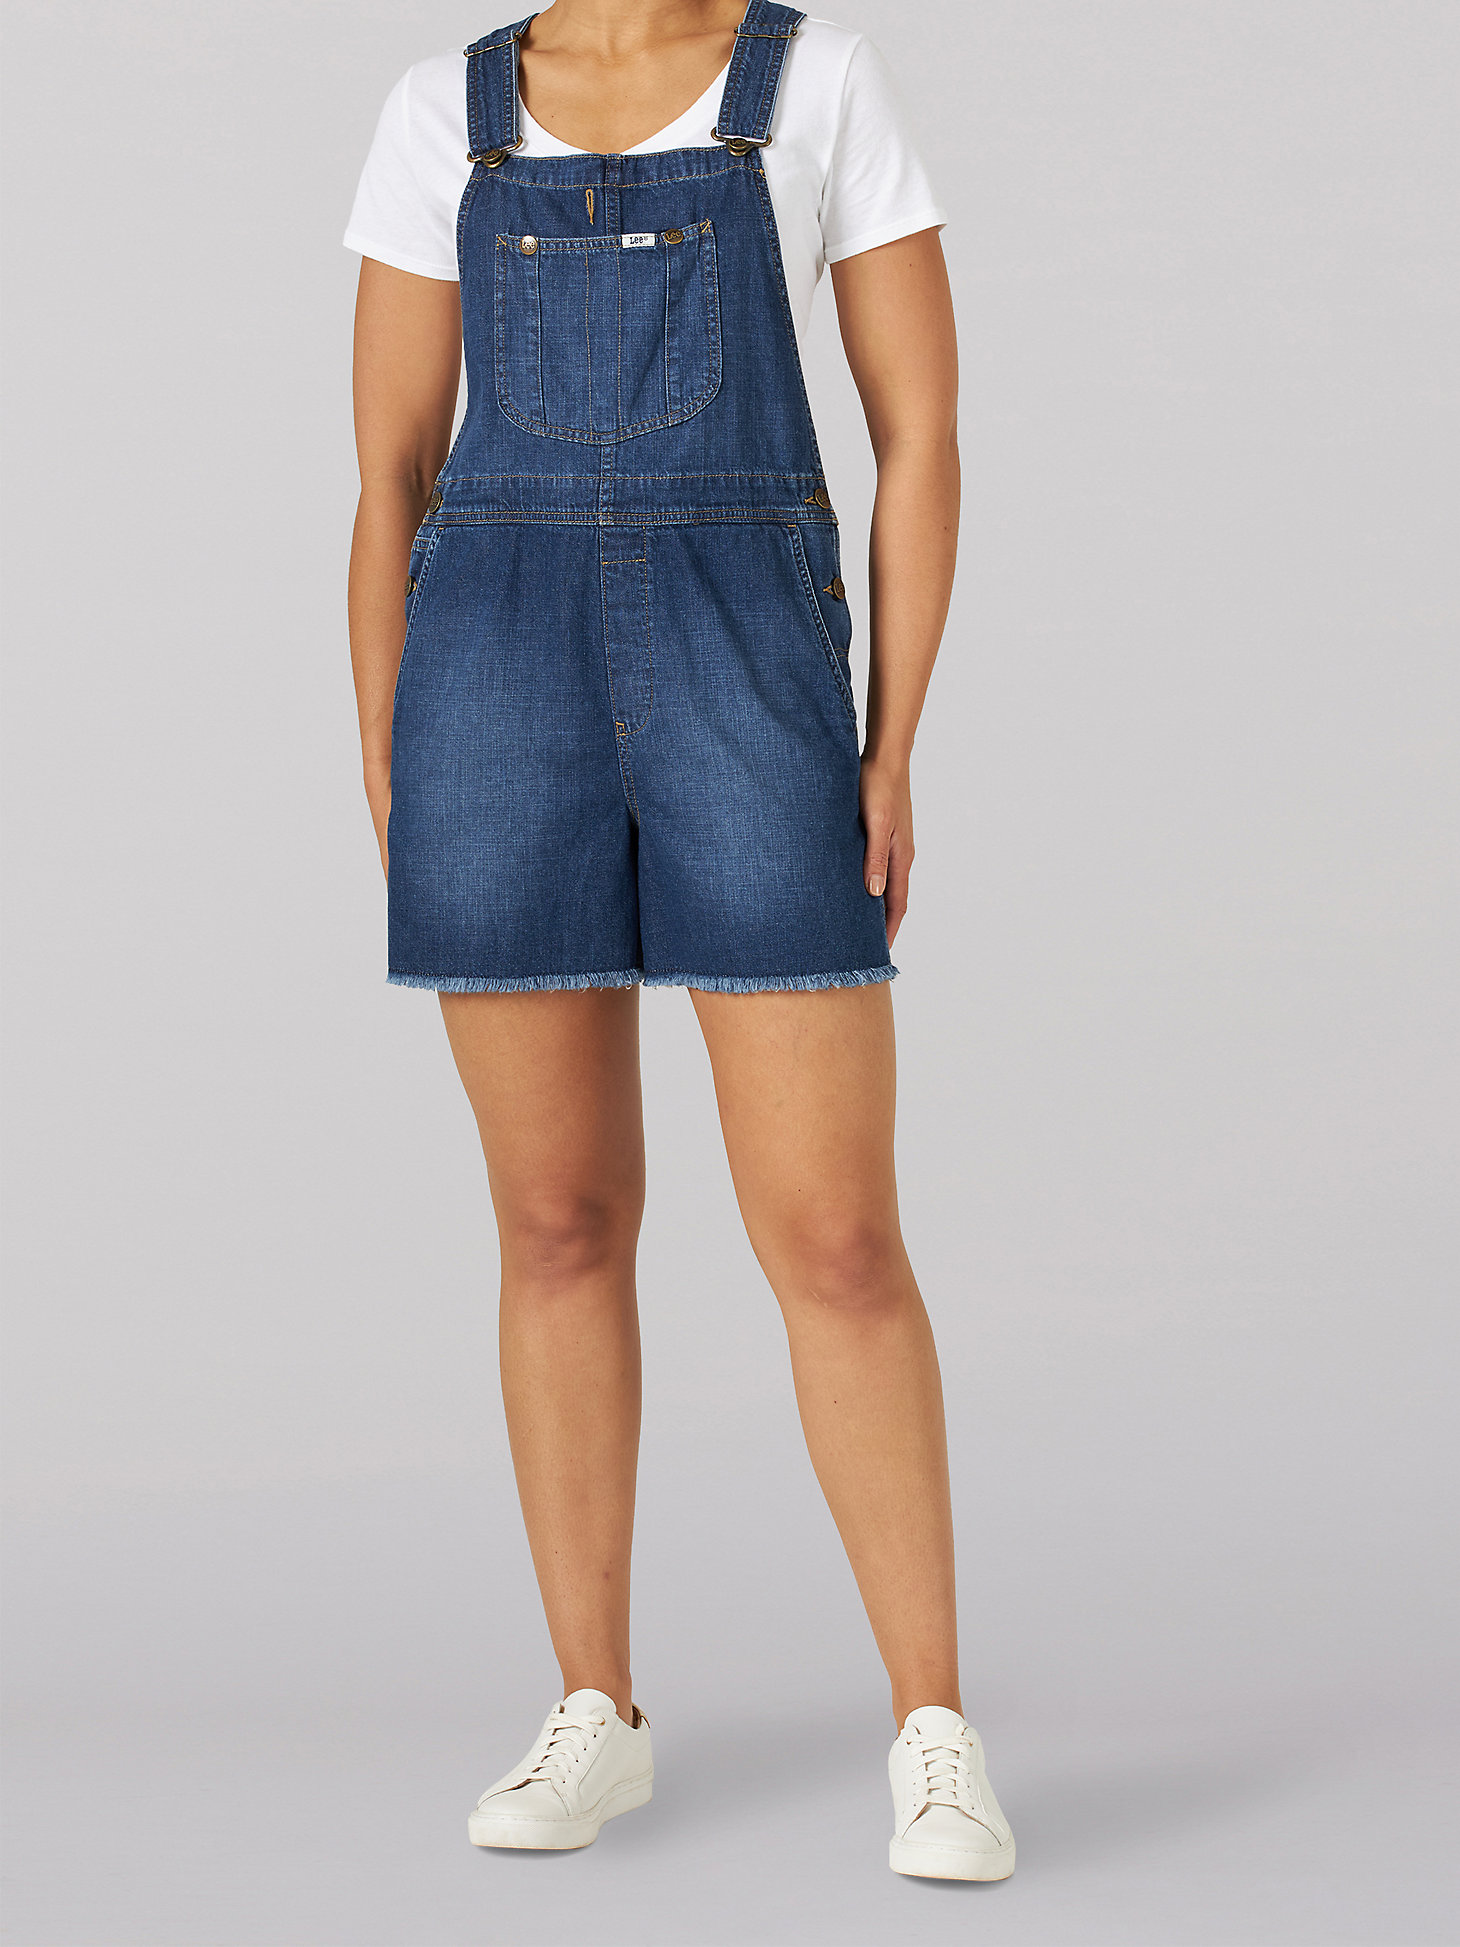 Women's Relaxed Short Denim Overall in KC Blues main view